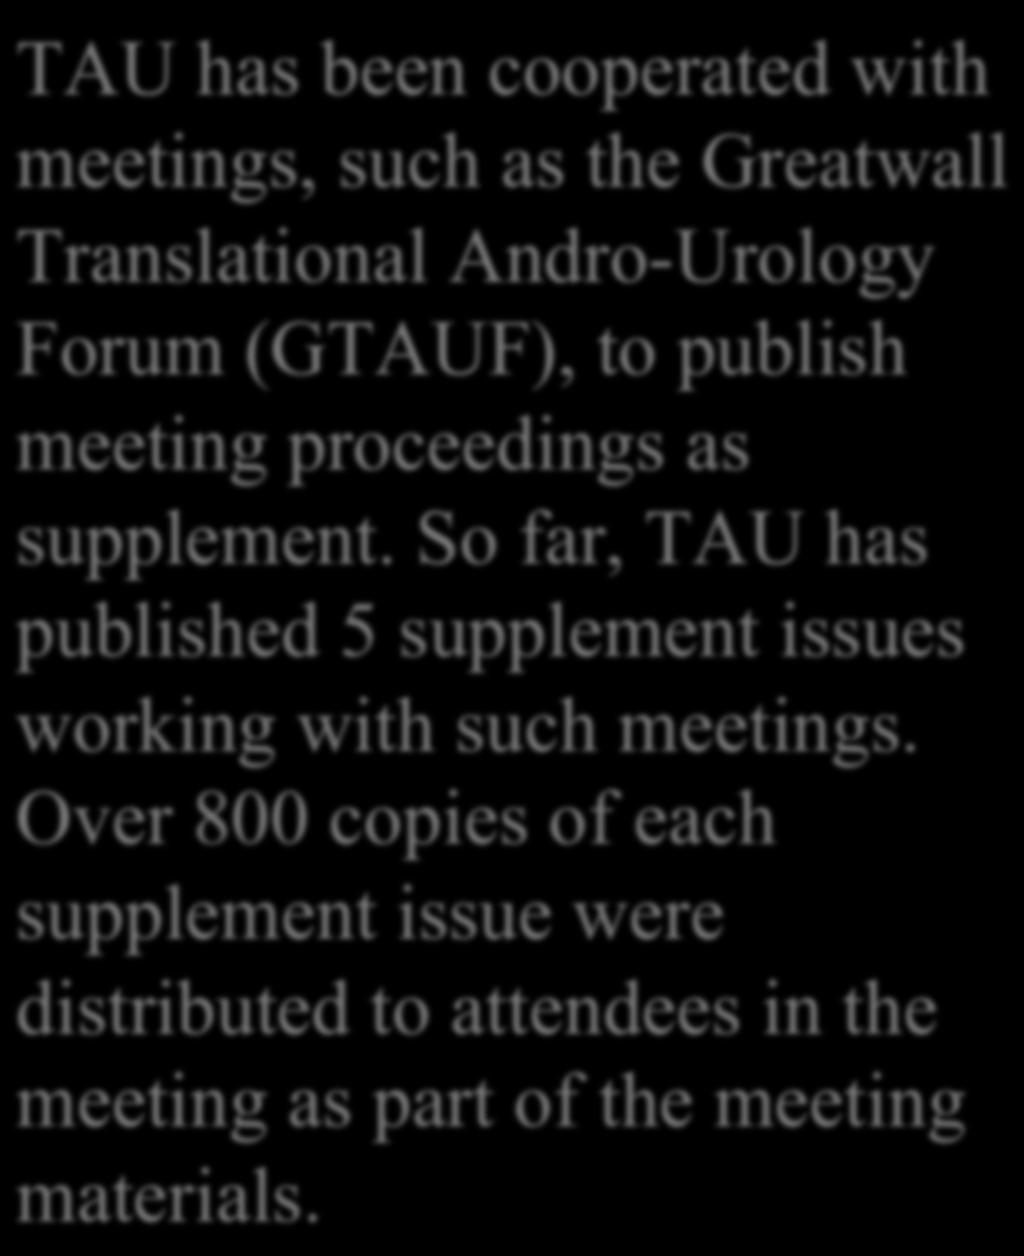 Forum (GTAUF), to publish meeting proceedings as supplement.